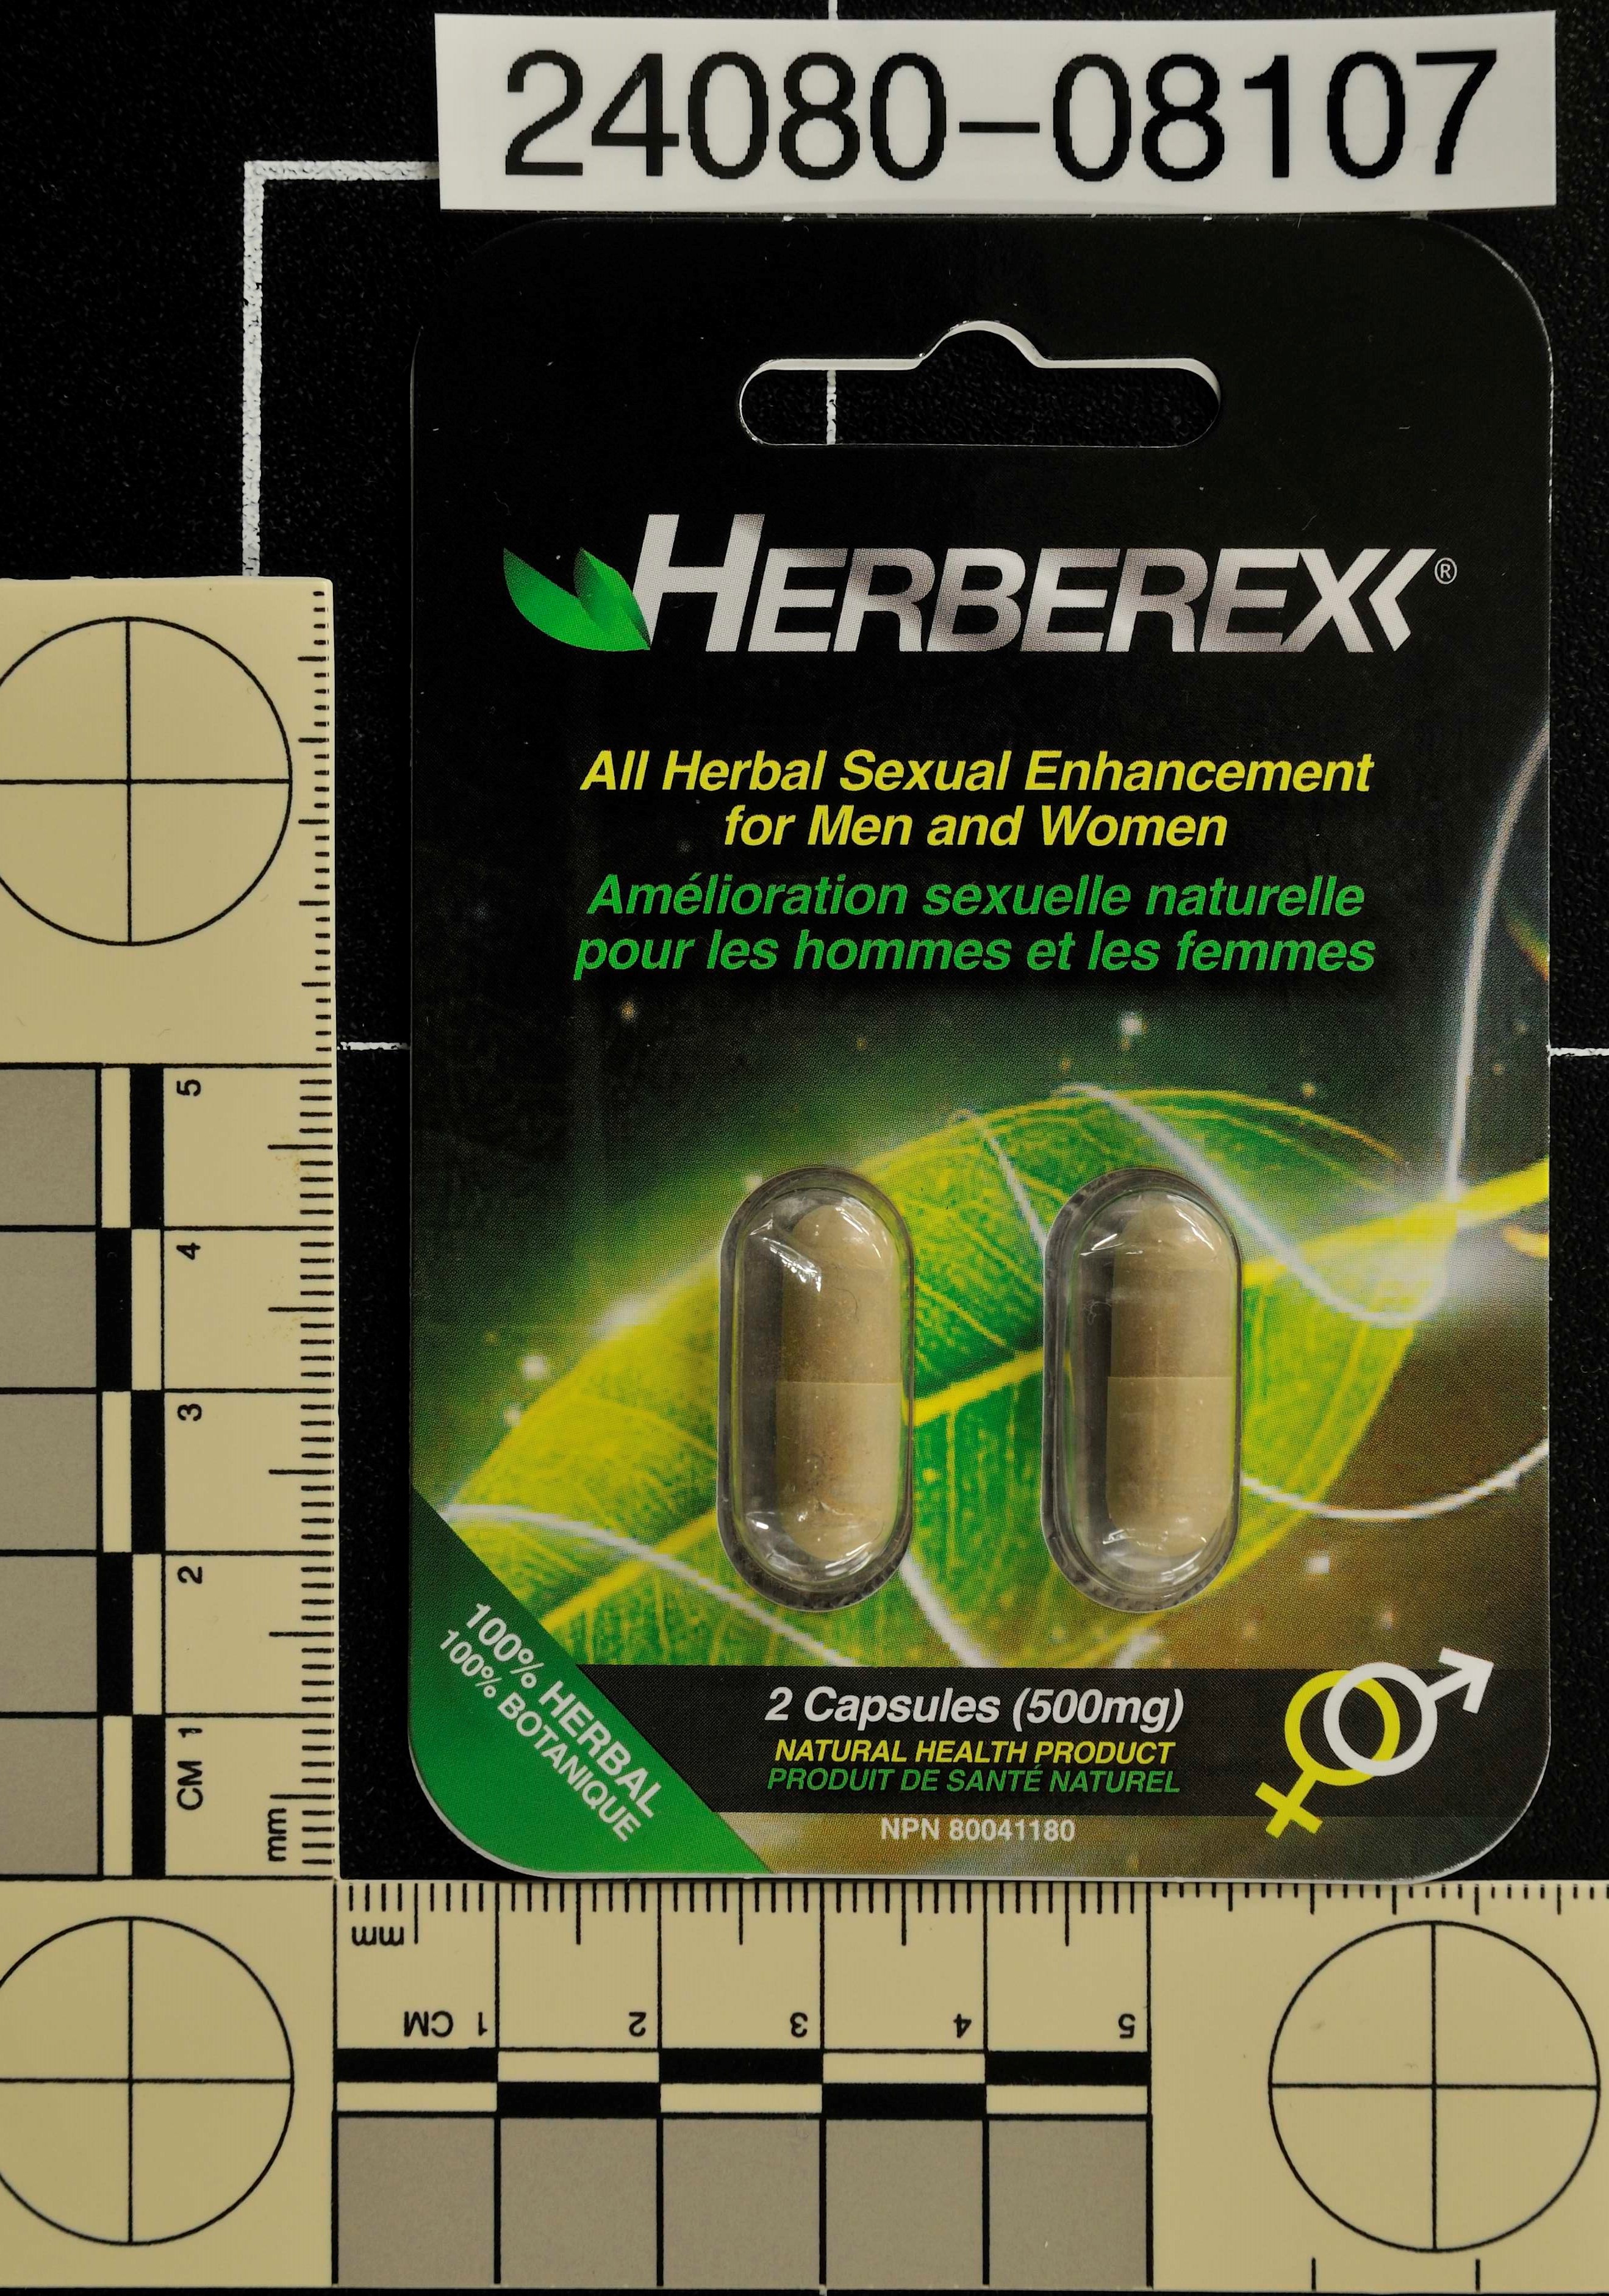 Image of the illigal product: Herberex